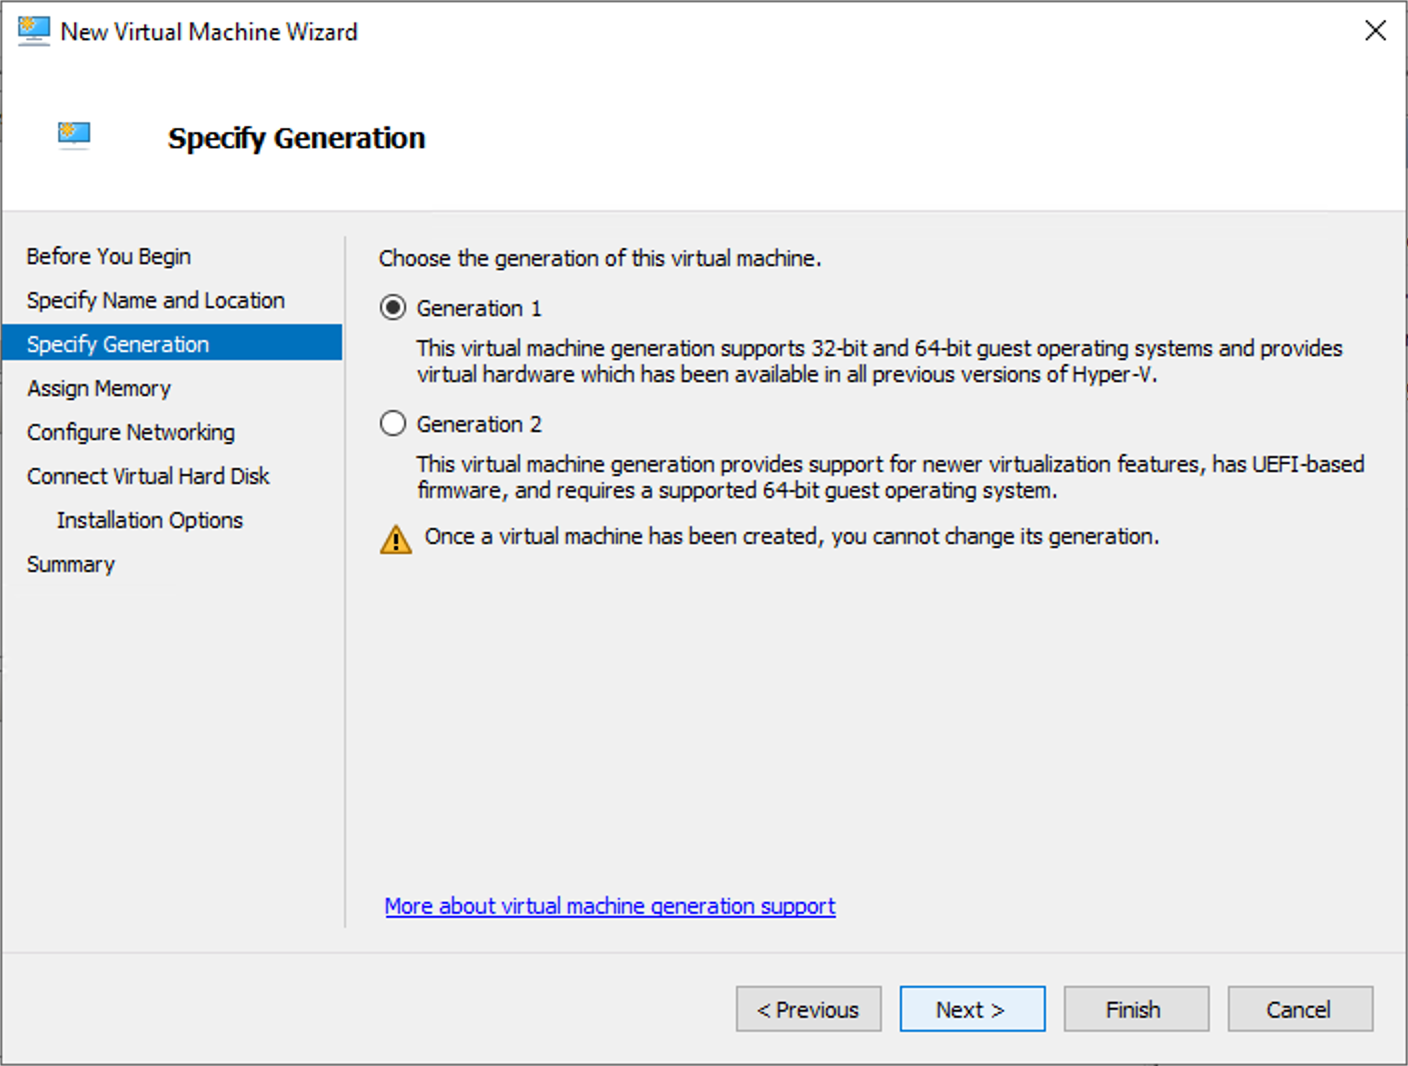 Specify either generation of the VM. This can be either Generation 1 or Generation 2